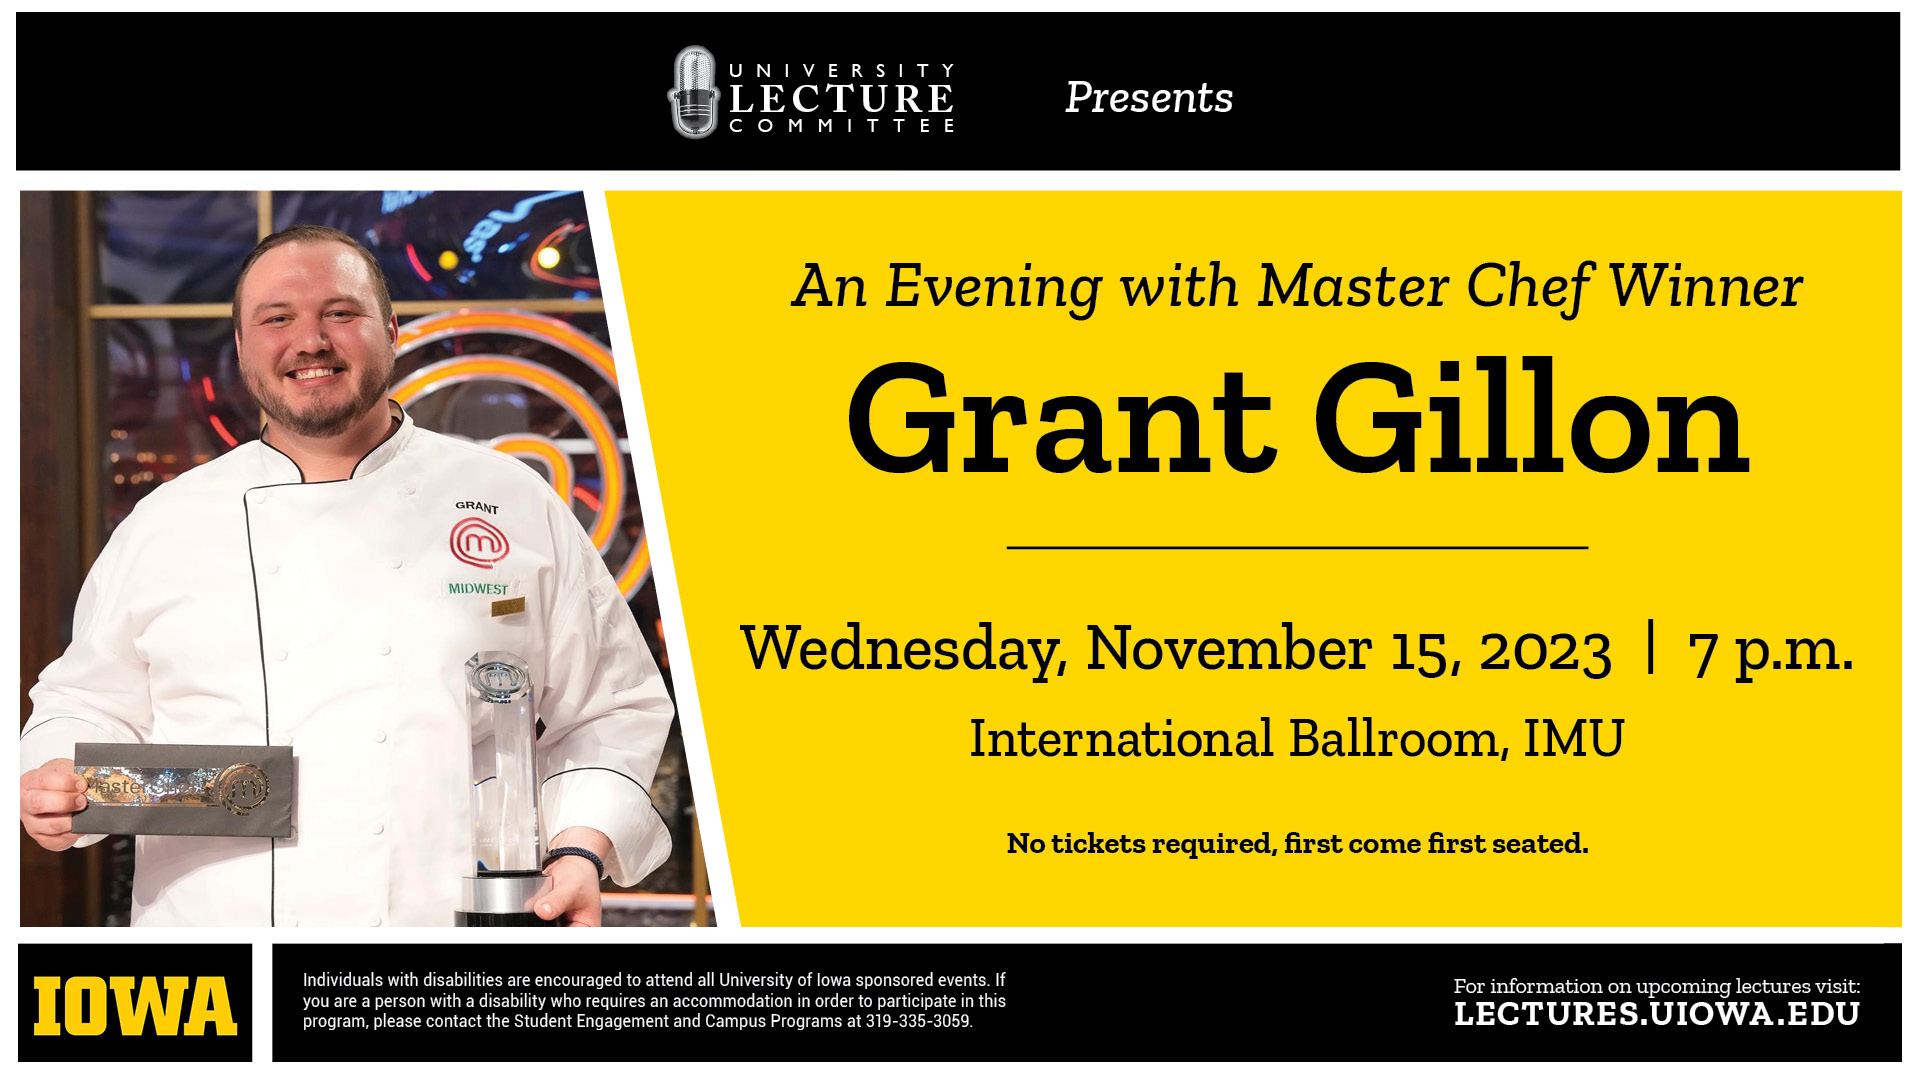 An Evening with Master Chef Winner Grant Gillon